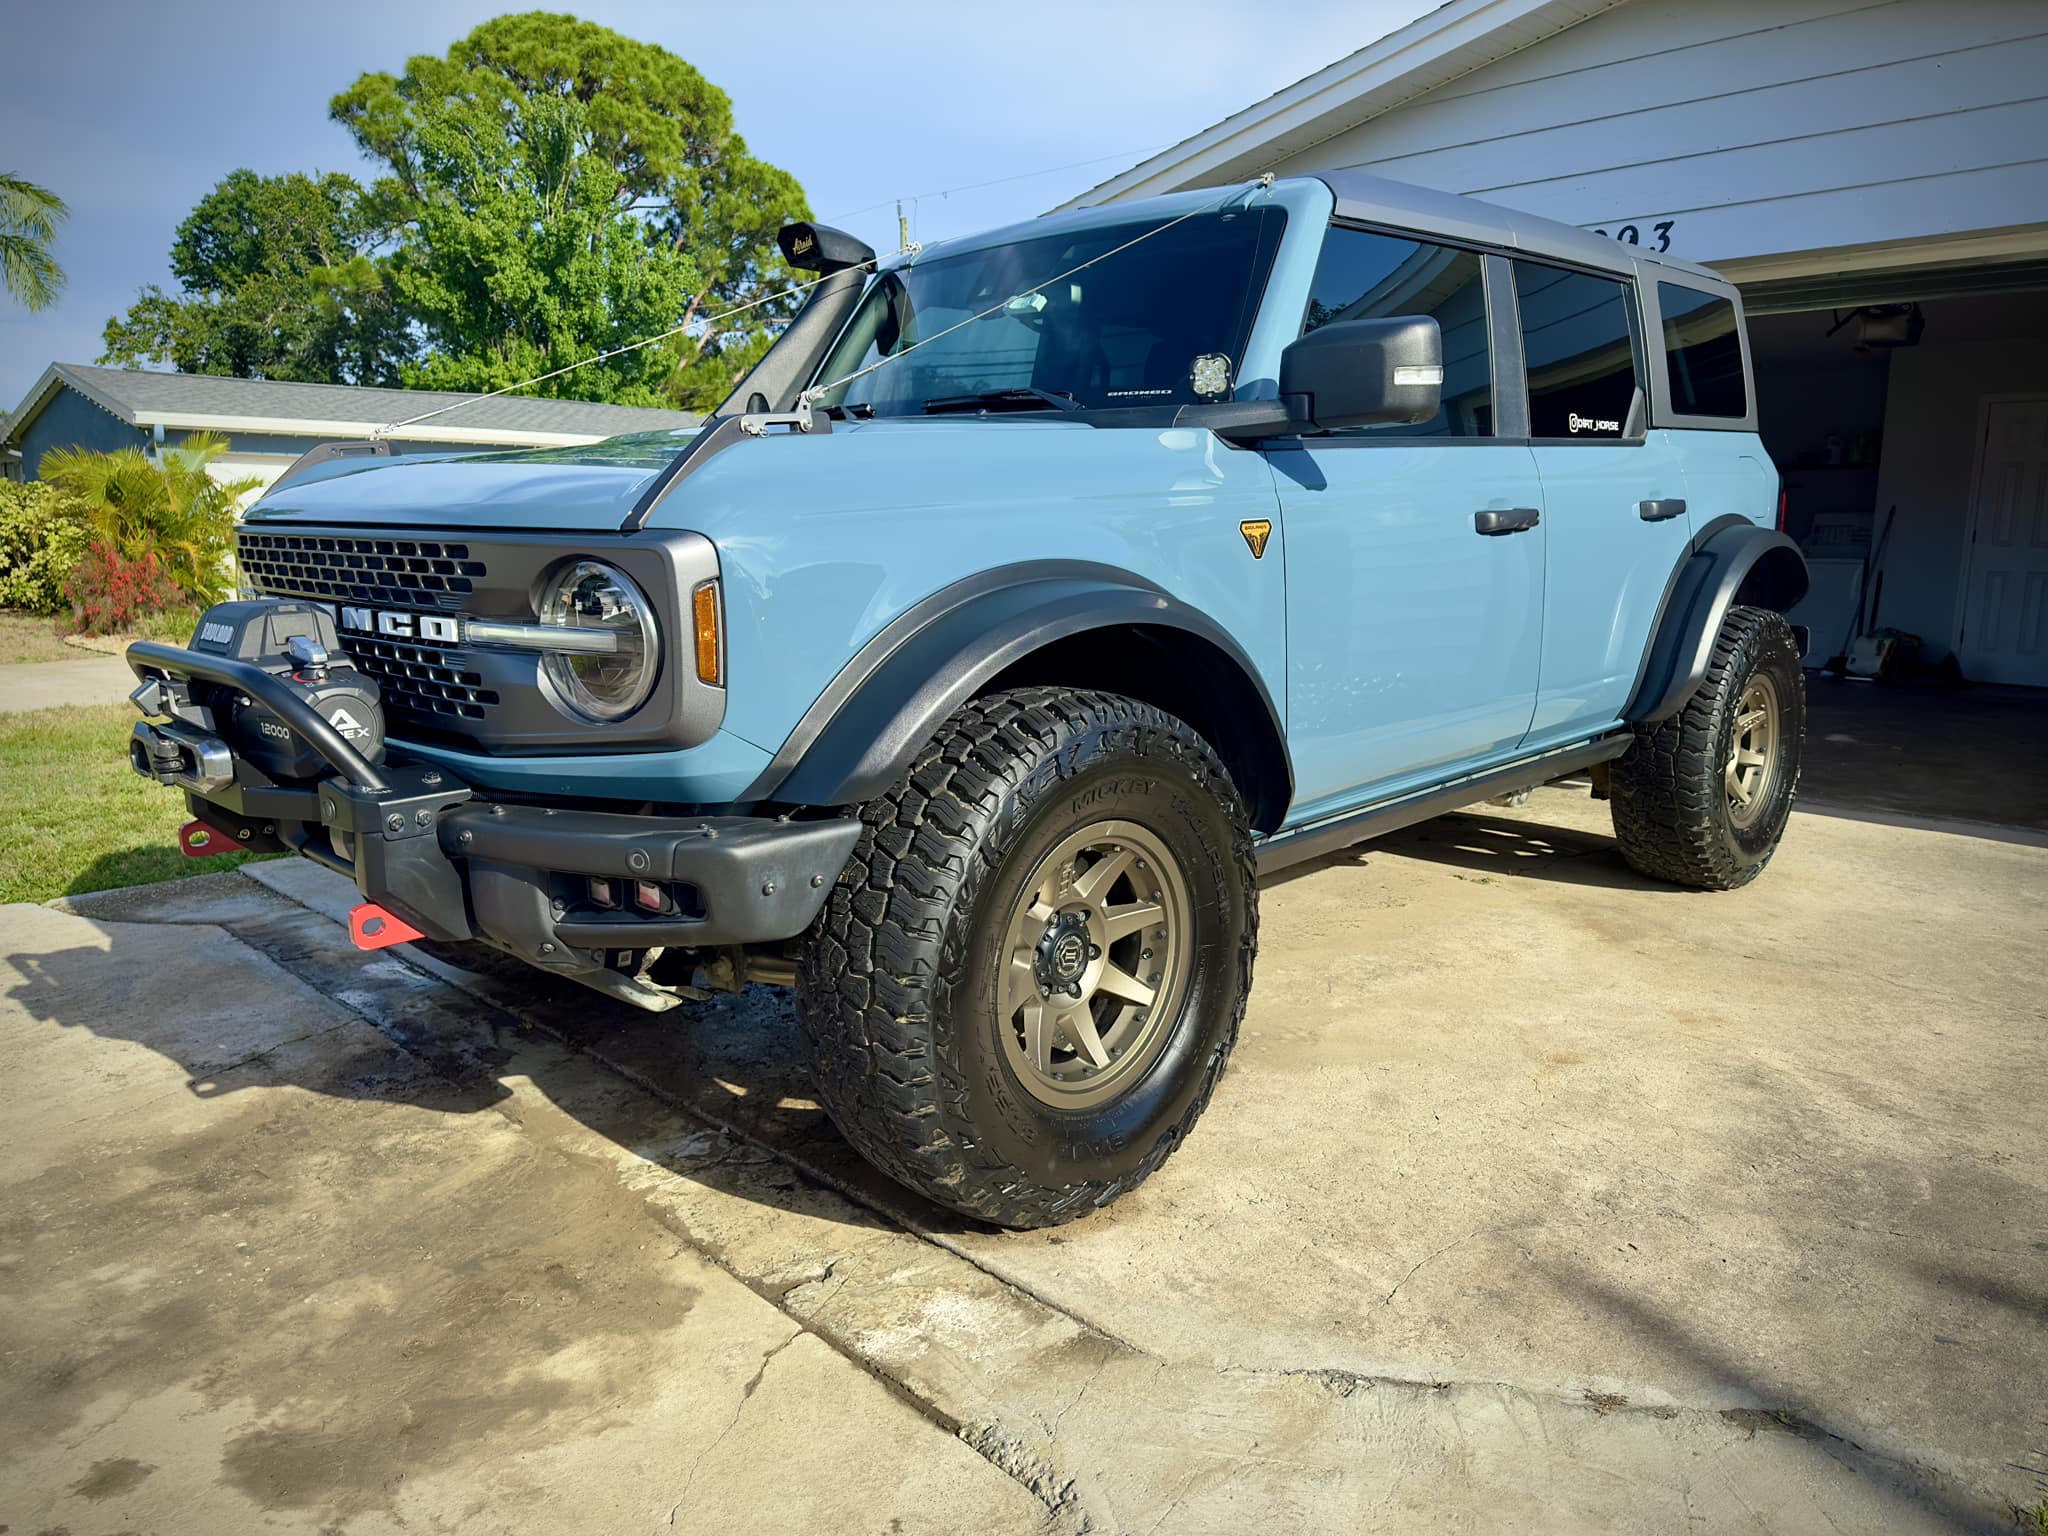 Ford Bronco 2x1 Tuesday! Let's see those before & after photos. 440567623_3871827799713188_6452532796262516296_n